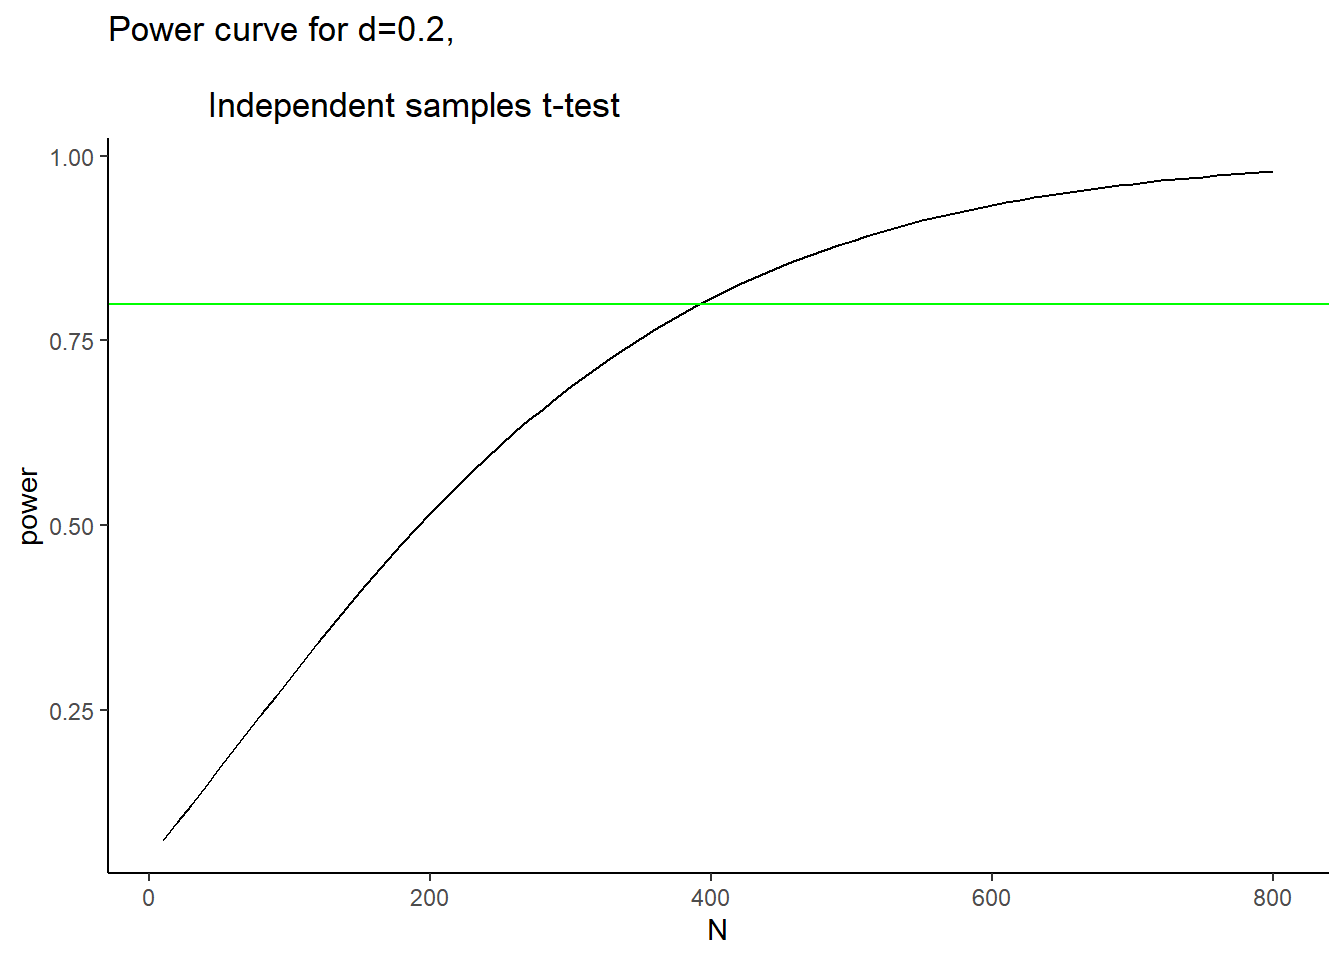 This figure shows power as a function of N for a between-subjects independent samples t-test, with d=0.2, and alpha criterion 0.05.